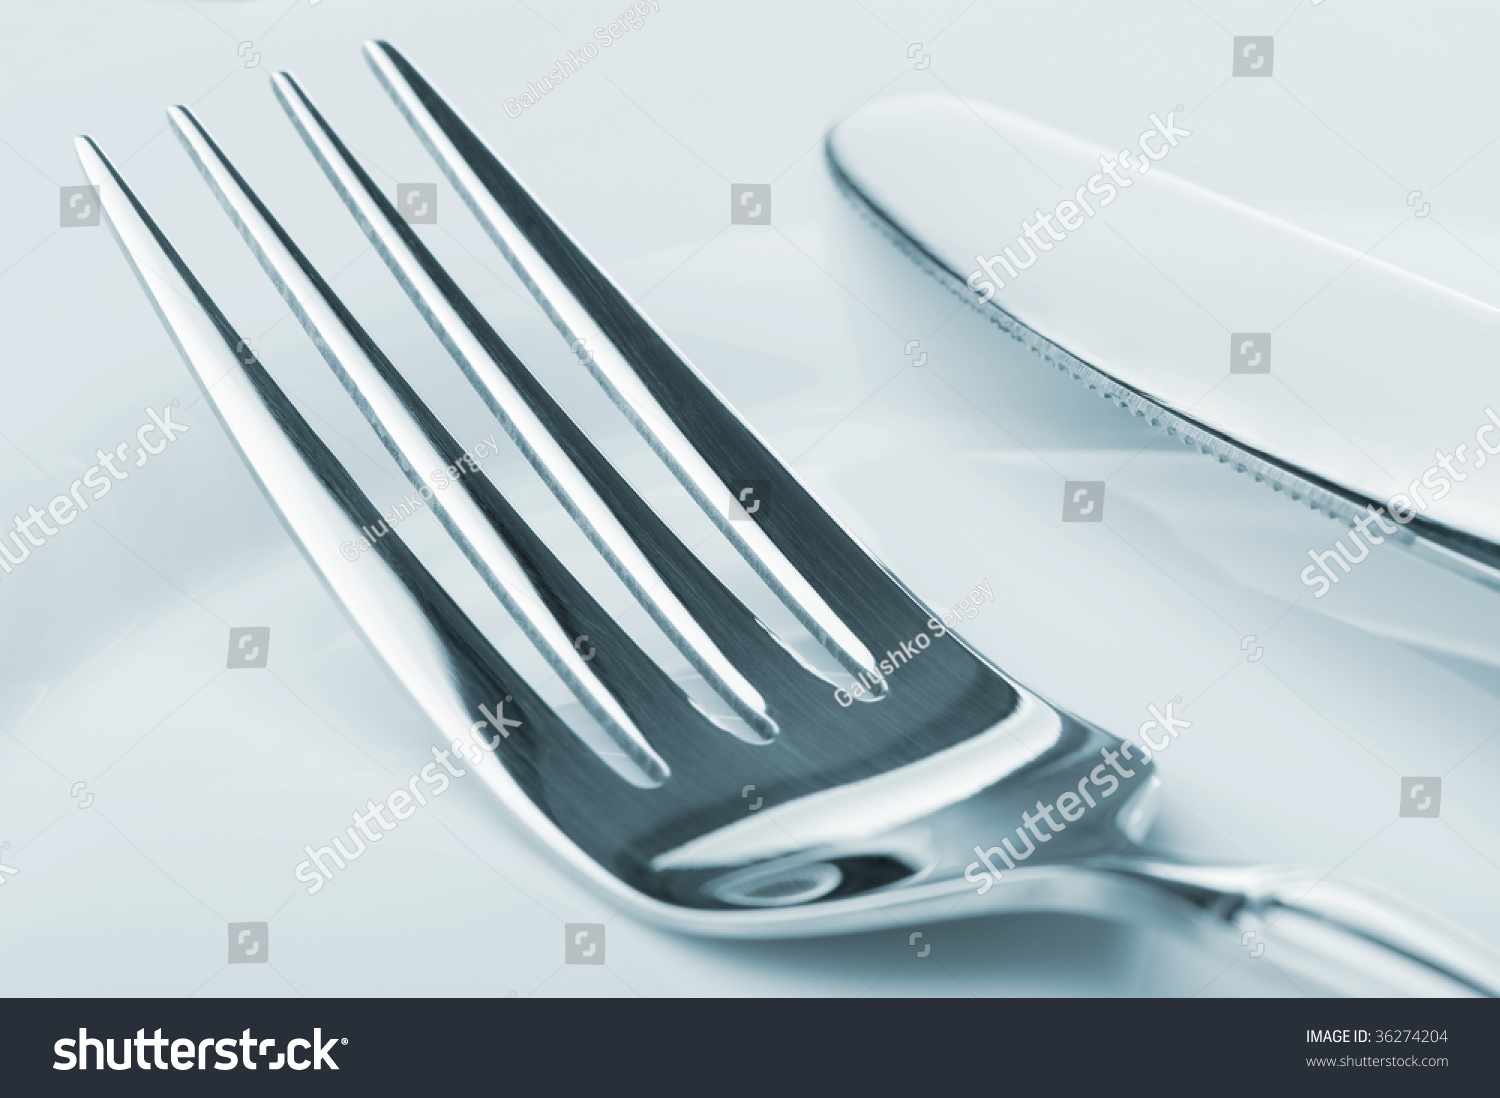 Knife and fork on a plate #36274204